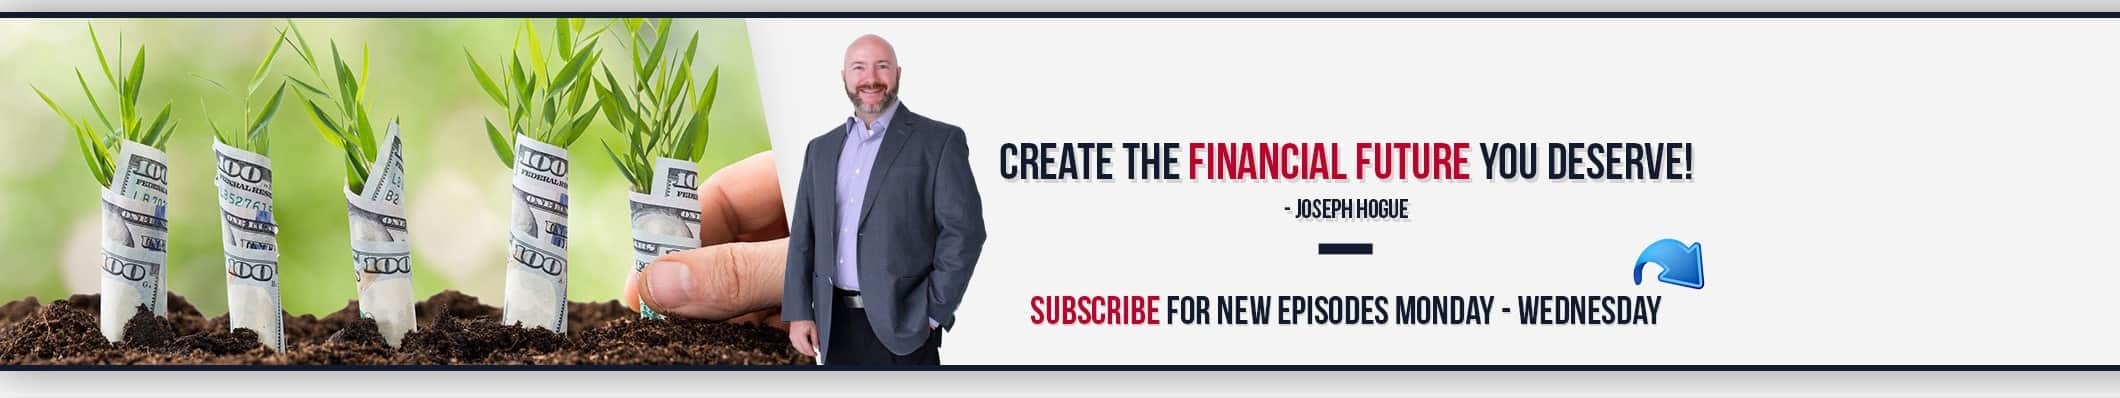 A conceptual banner depicting financial growth with plants sprouting from u.s. dollar bills and a confident businessman encouraging people to create the financial future they deserve, with a call to action to subscribe for more insights.